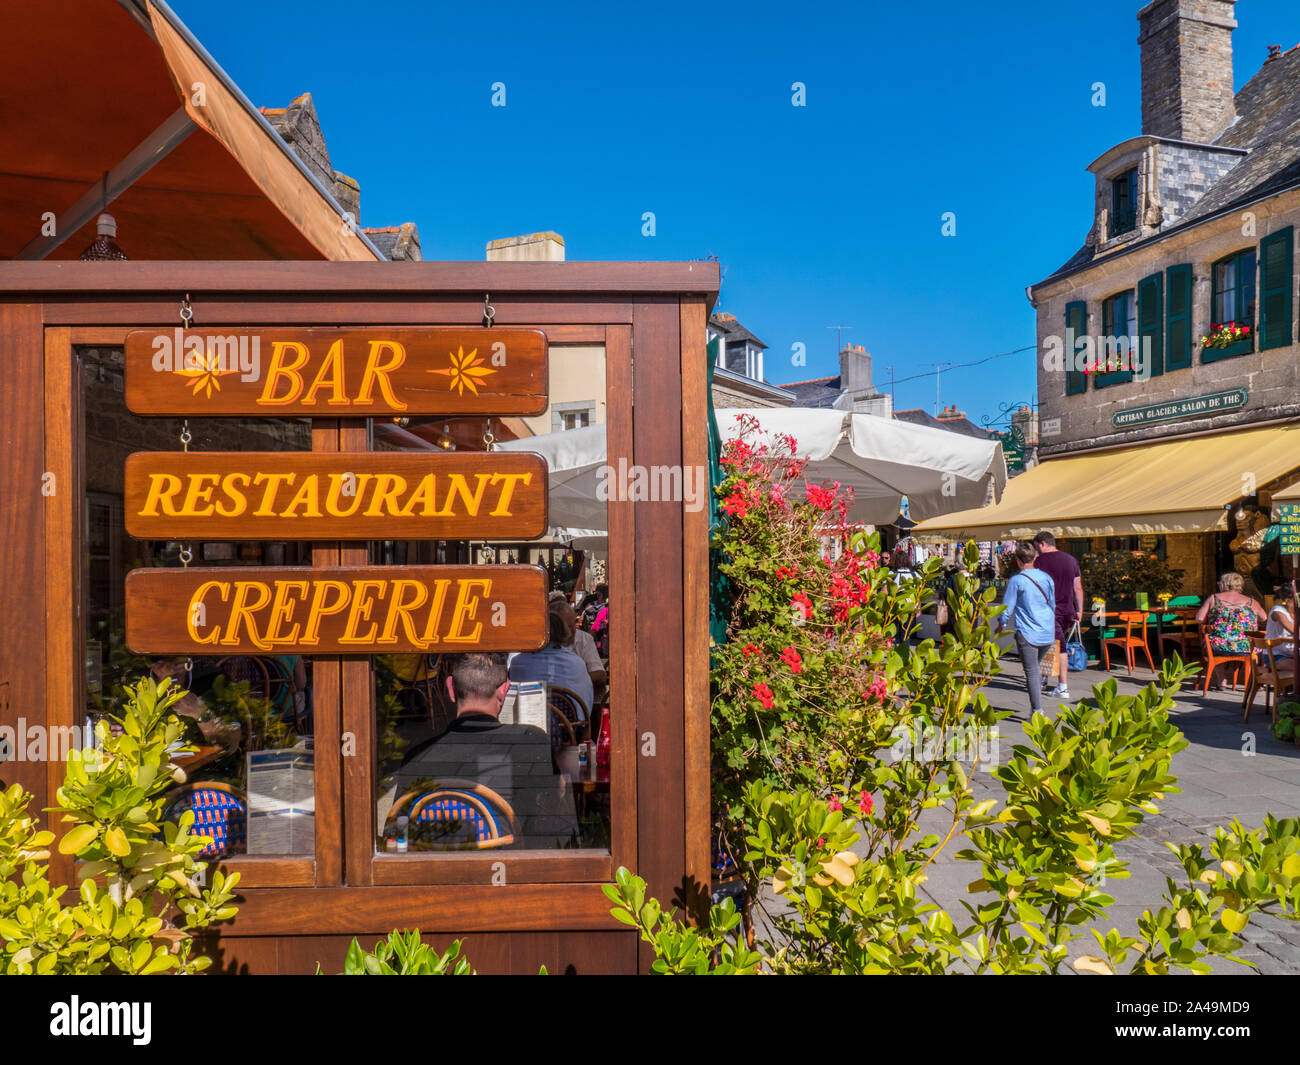 Old Concarneau Brittany French alfresco bar creperie restaurant sign with visitors enjoying sun Ville Close de Concarneau Bretagne Finistere France Stock Photo